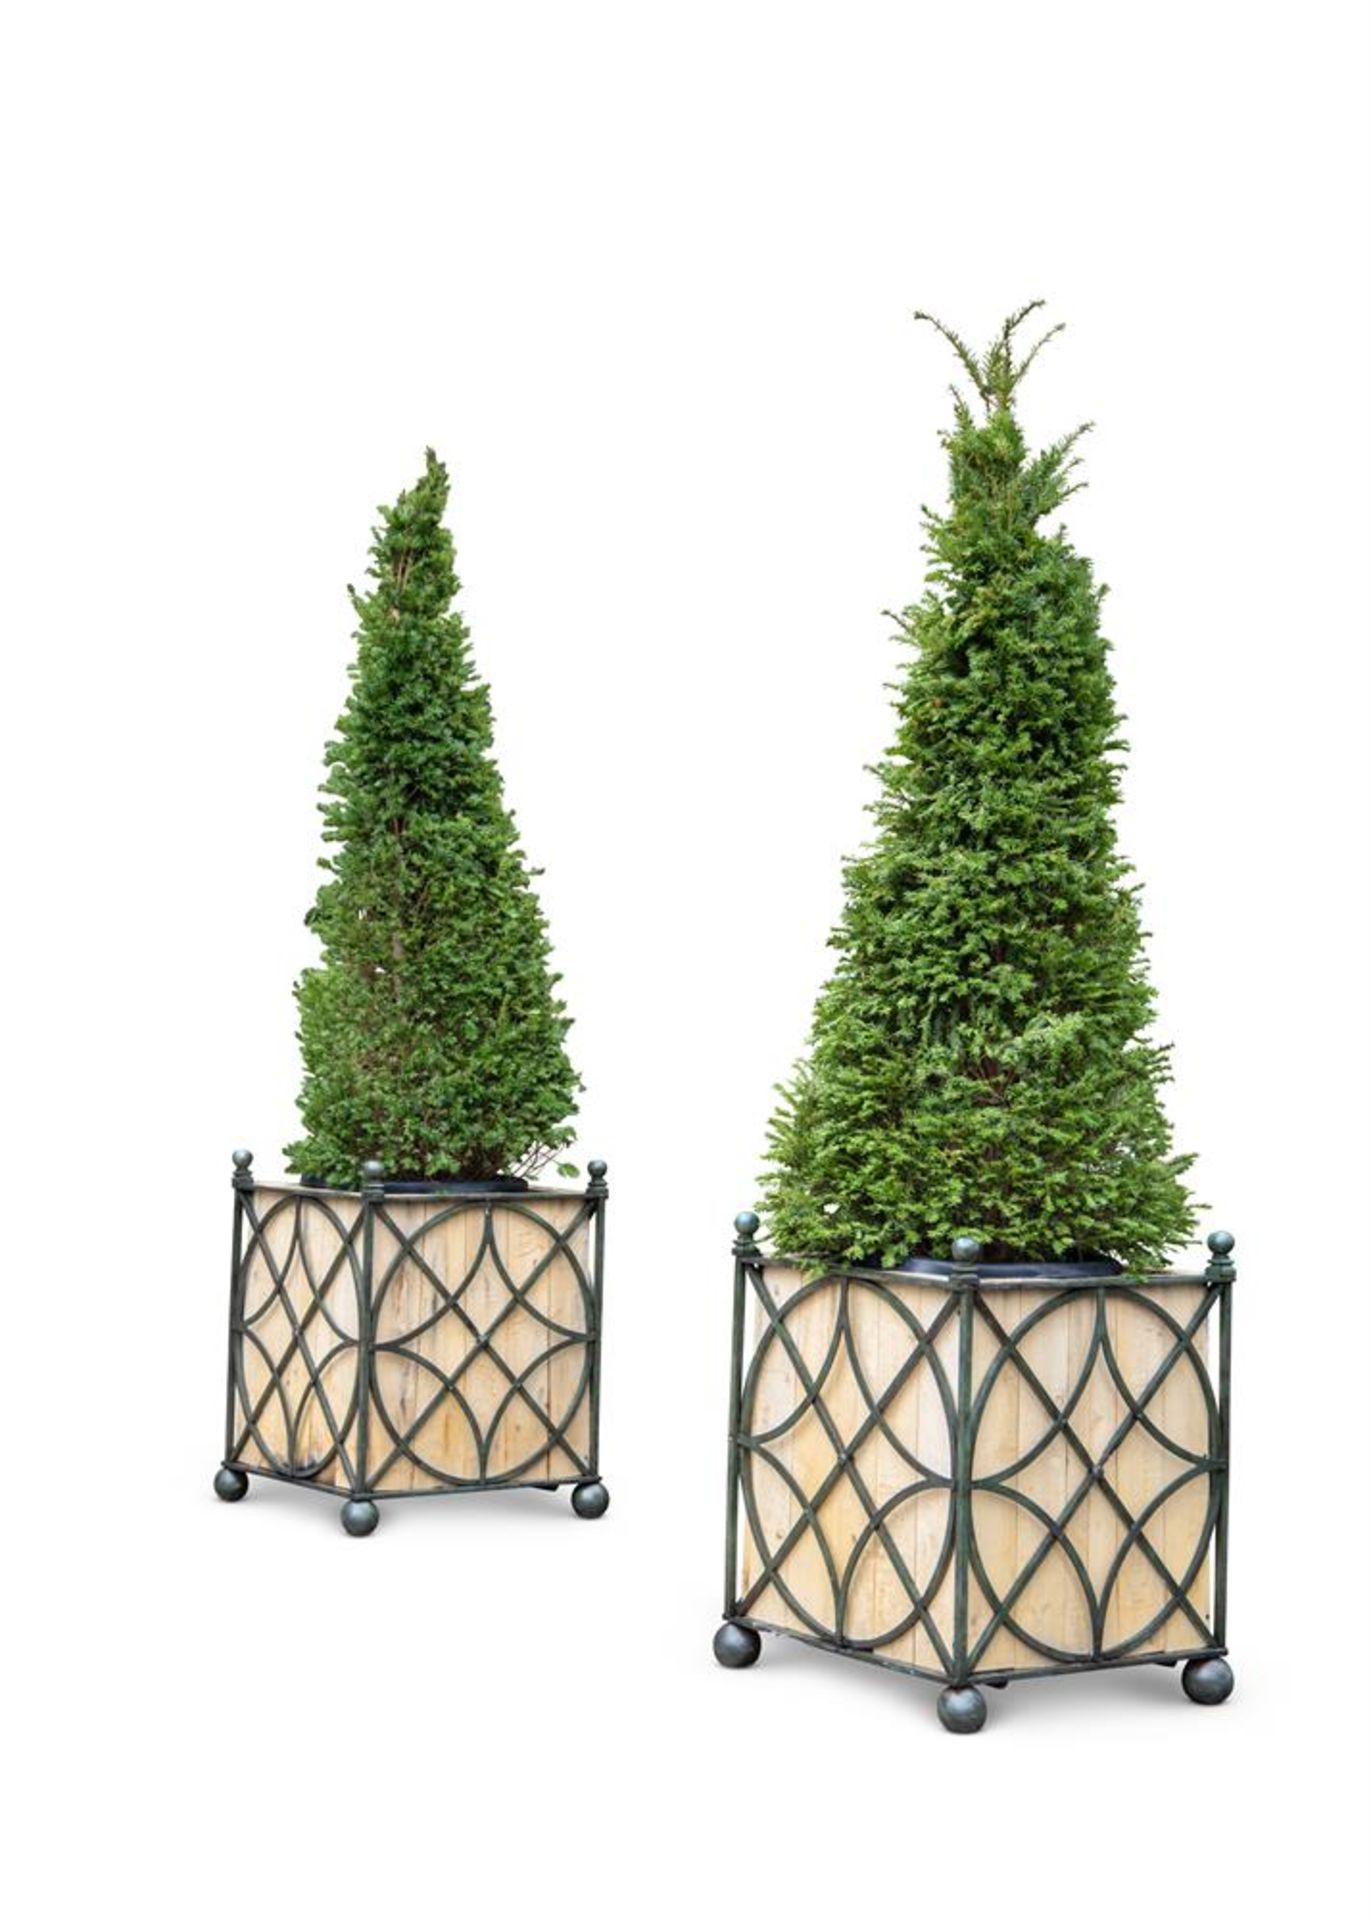 A PAIR OF WROUGHT IRON PLANTERS, PROBABLY FRENCH, LATE 19TH/EARLY 20TH CENTURY